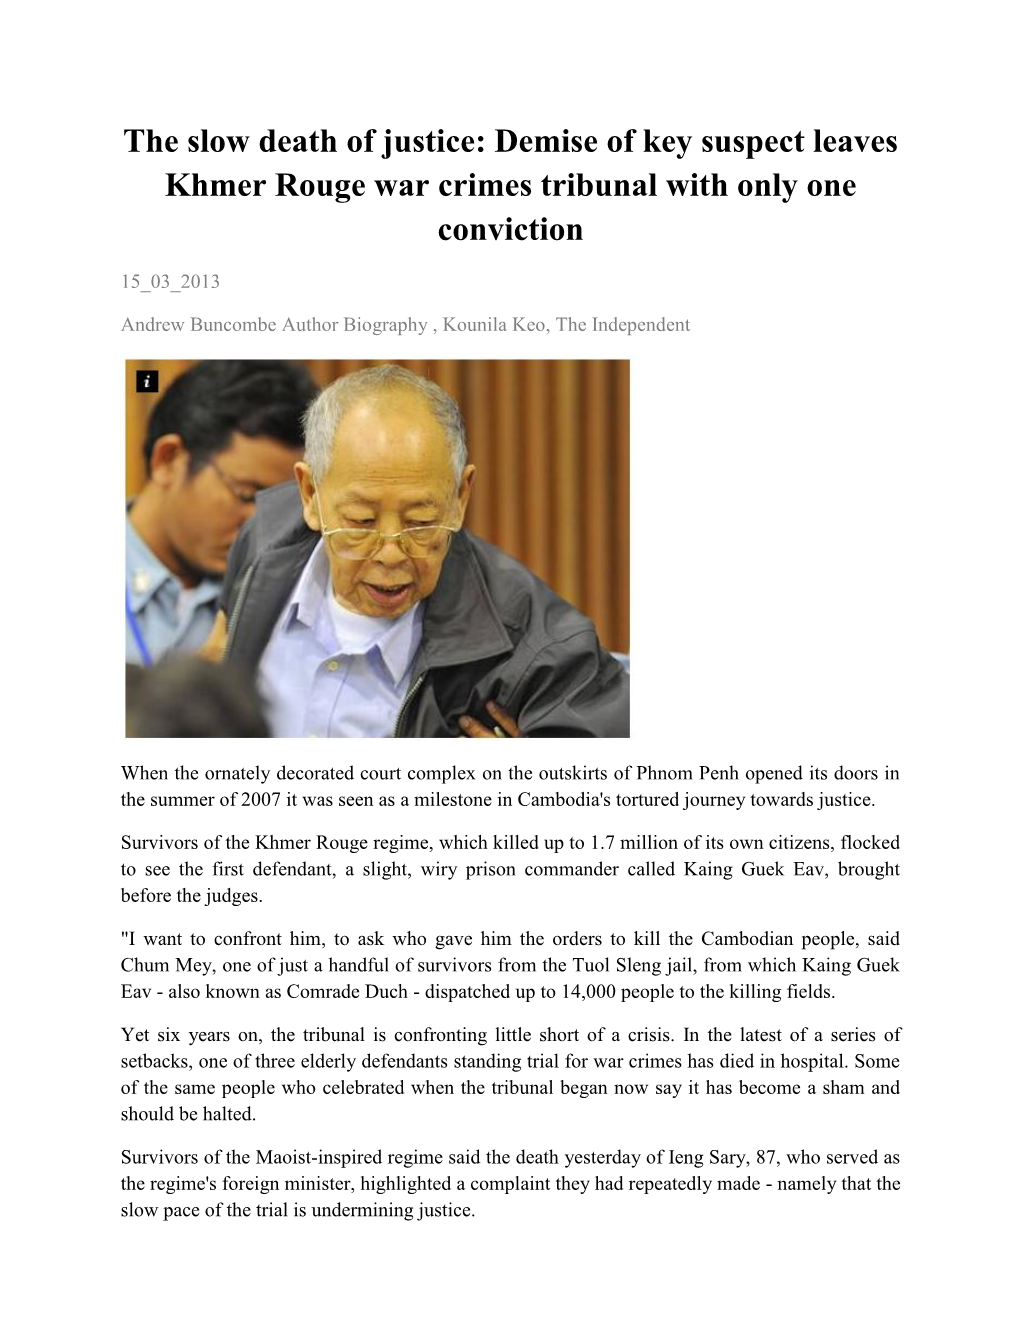 The Slow Death of Justice: Demise of Key Suspect Leaves Khmer Rouge War Crimes Tribunal with Only One Conviction